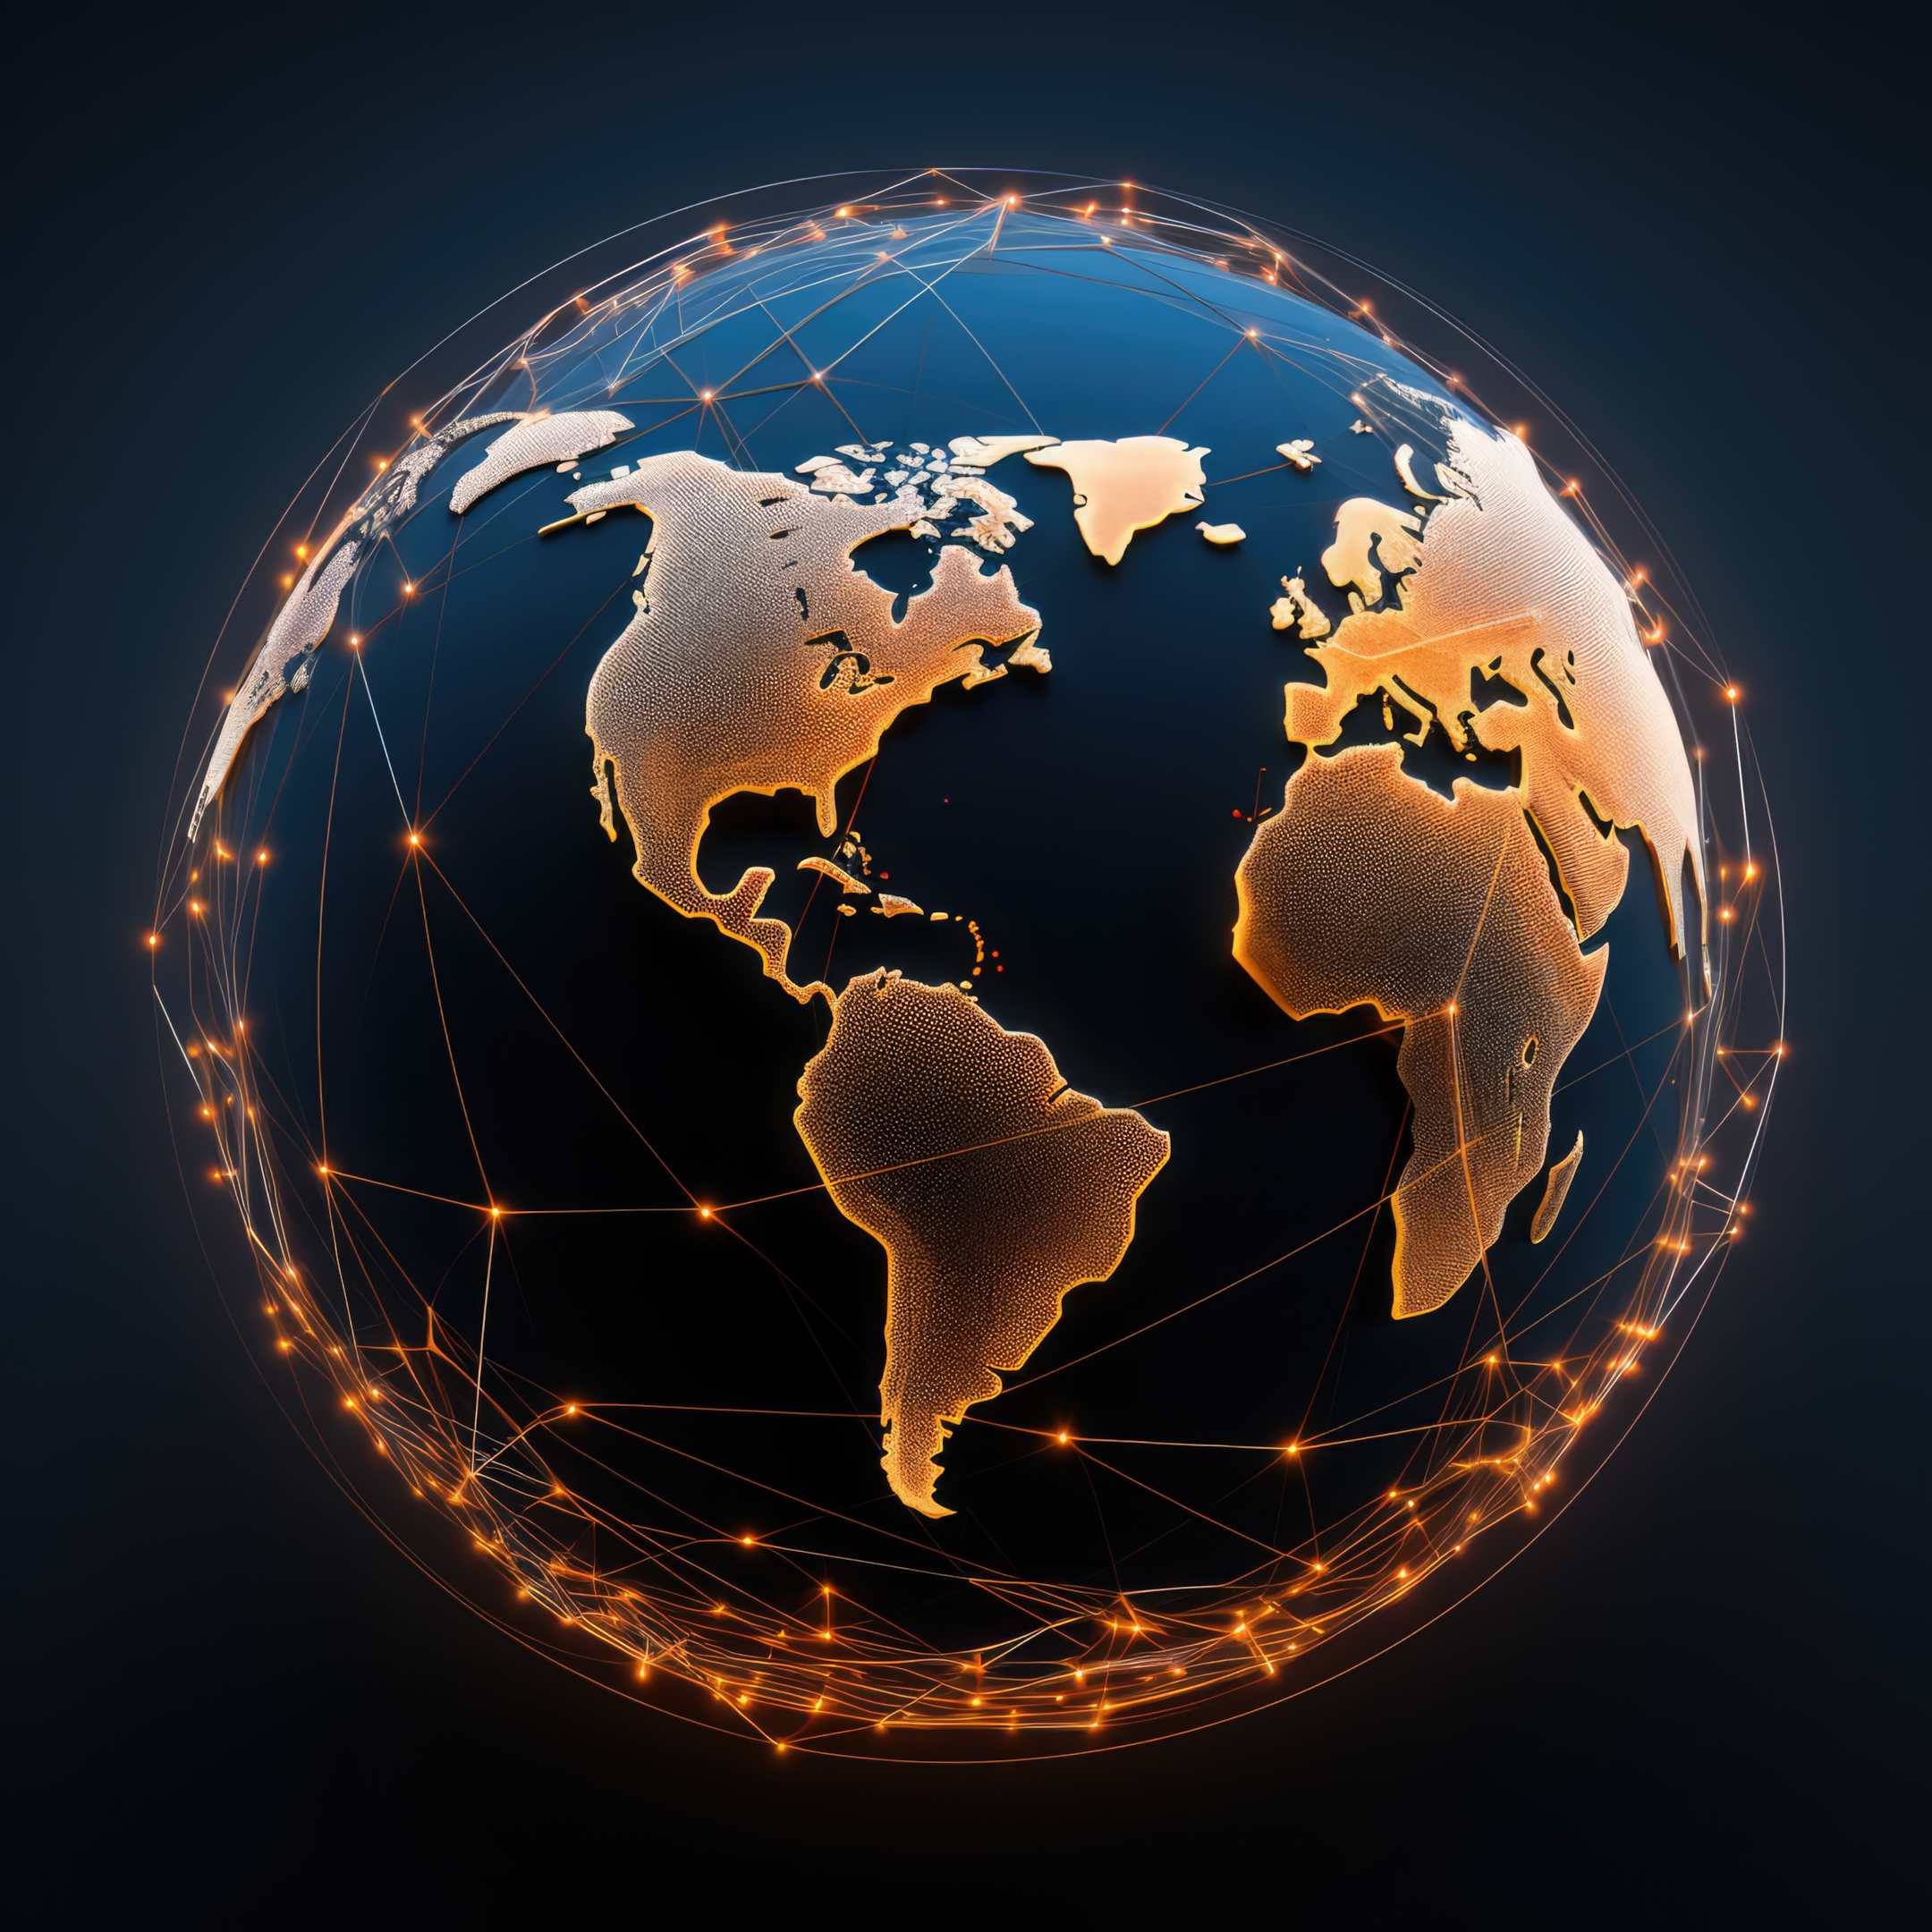 A black world map with thin, golden lines radiating from major financial centers. These lines symbolize the global expansion and interconnectedness of blockchain platforms.